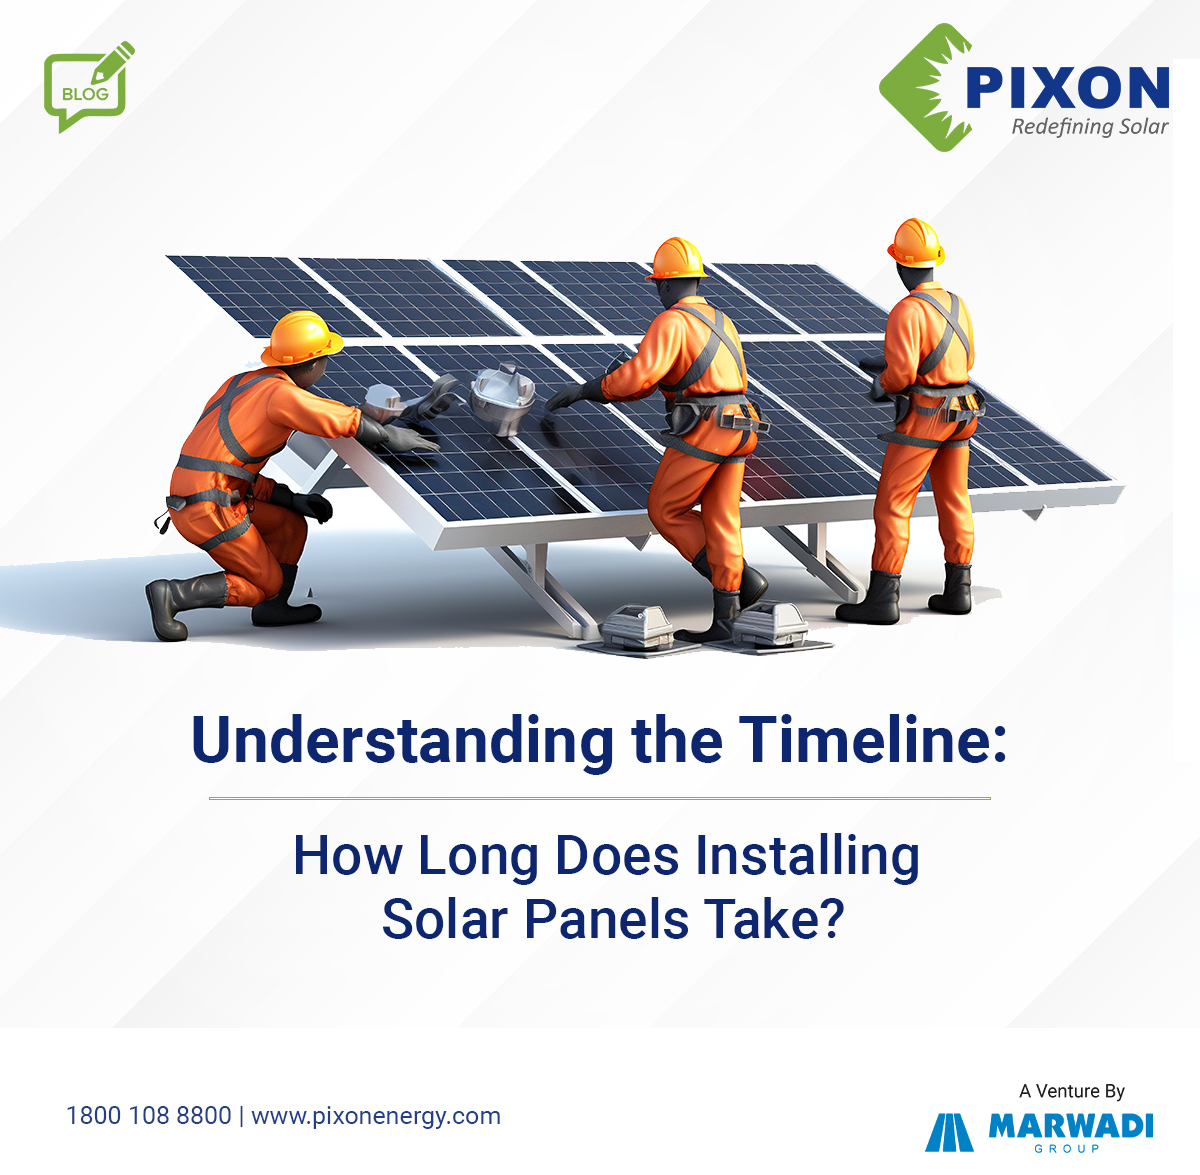 Ever wonder how long it takes to go solar? 
Our latest blog breaks down the timeline from decision to activation. 

Click the link- pixonenergy.com/article/Unders… 

#pixon #installation #technology #manufacturer #solarpanels #solarenergy #electricity #rooftop #delivery #inverter #meter